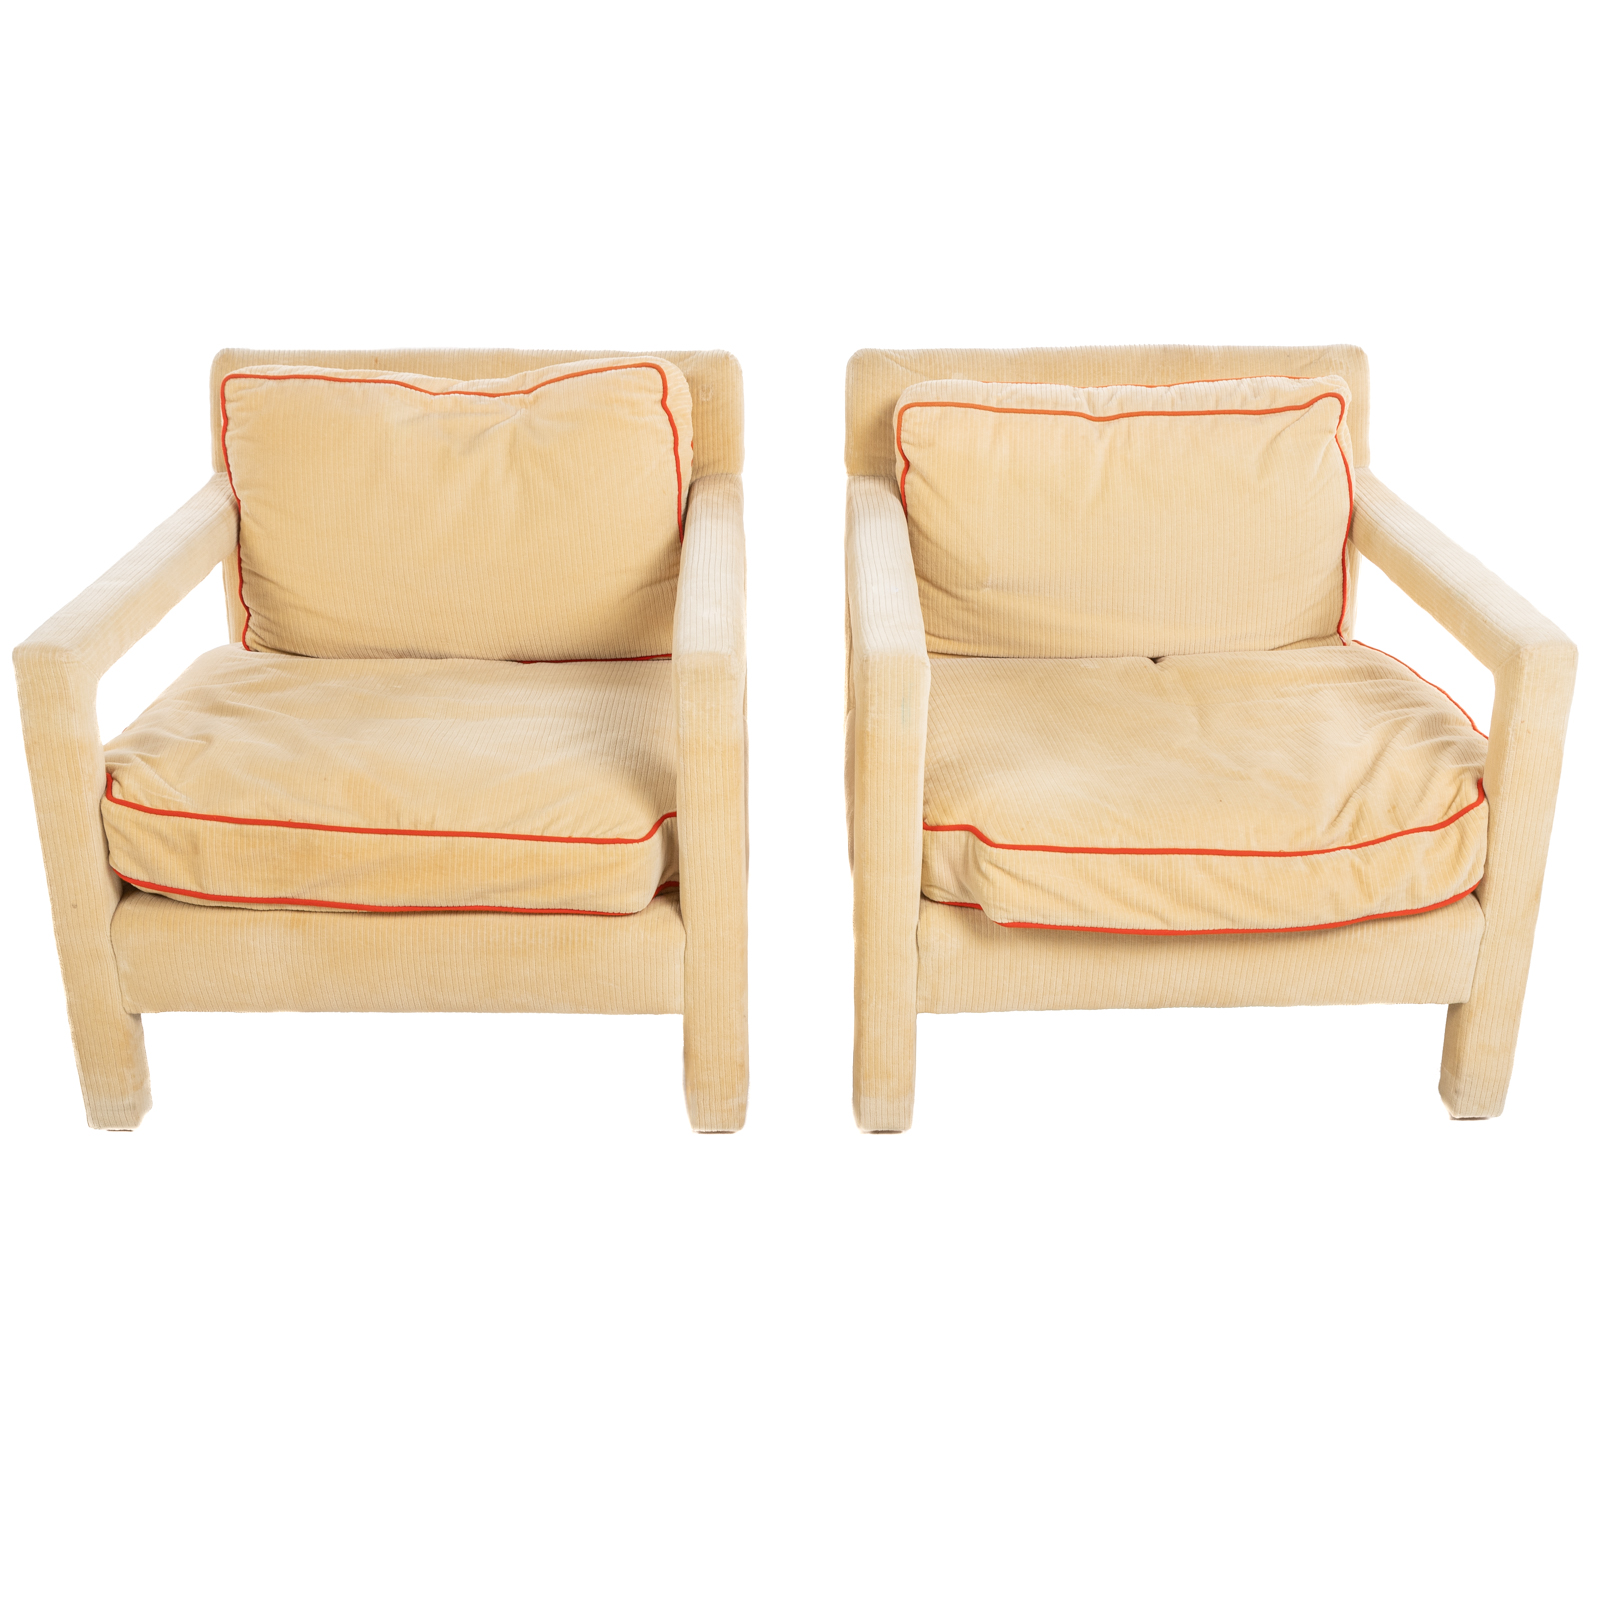 A PAIR OF MODERN UPHOLSTERED CHAIRS